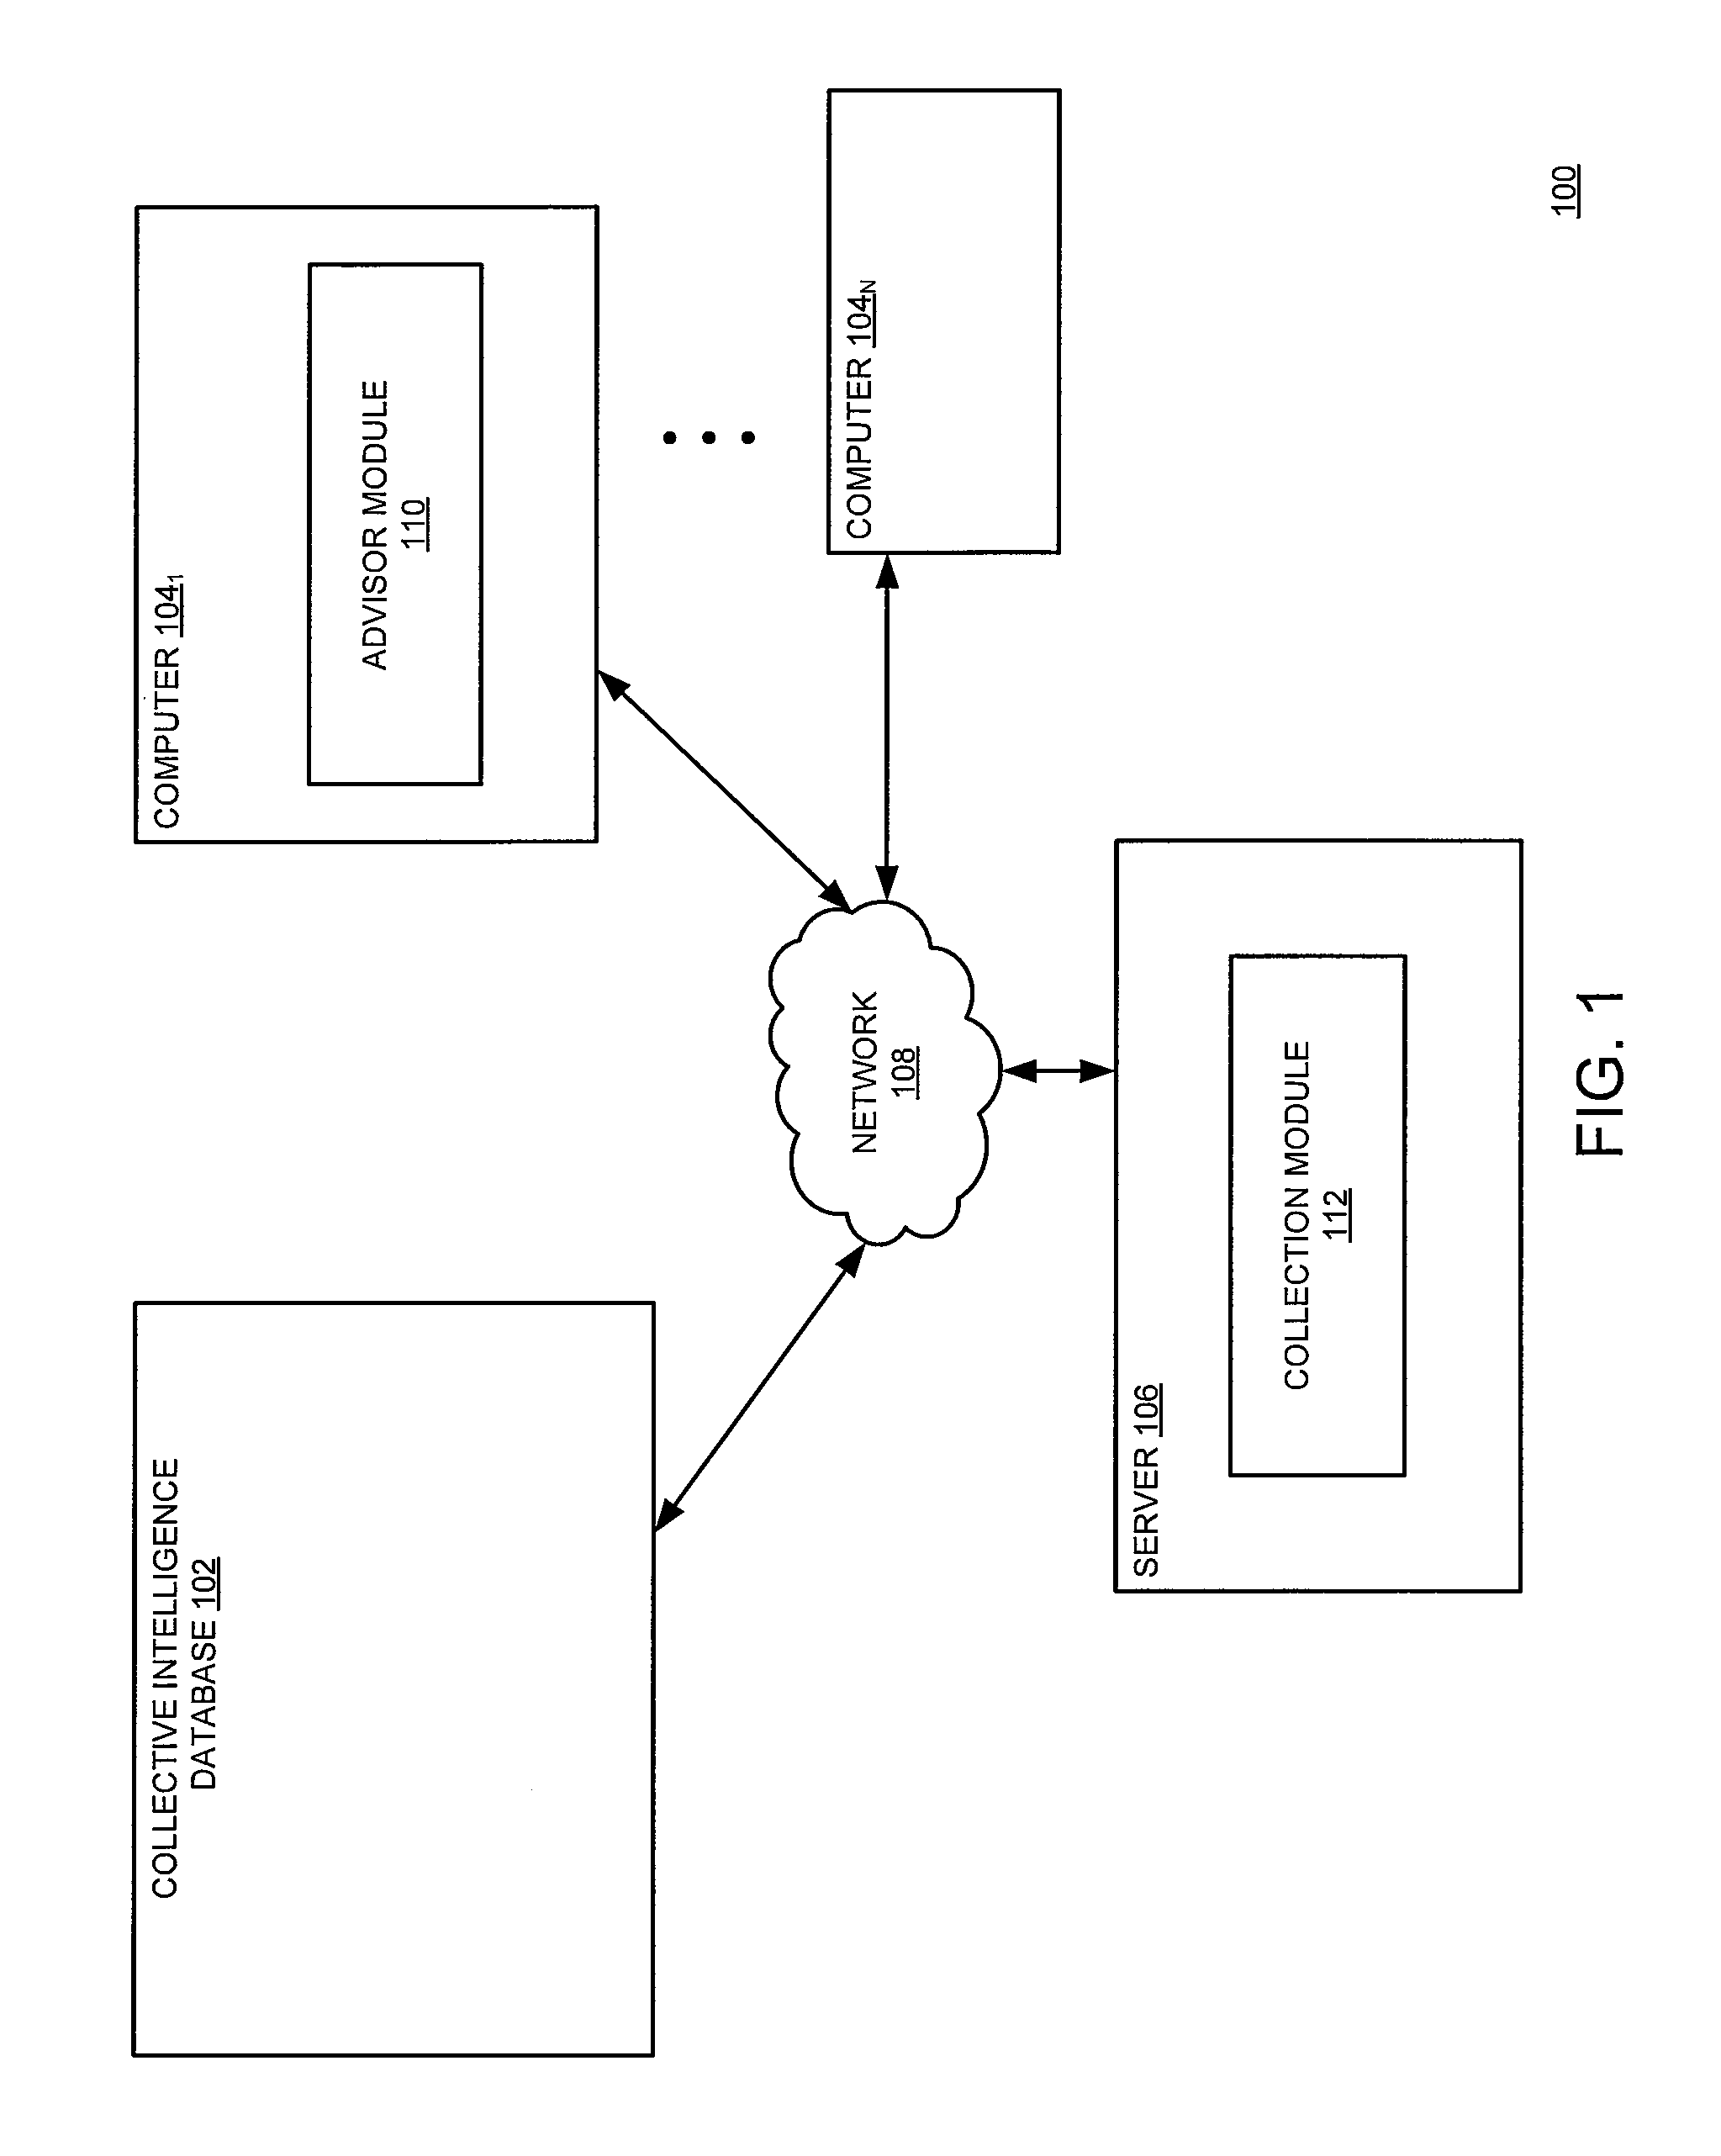 Method and apparatus for generating collective intelligence to automate resource recommendations for improving a computer